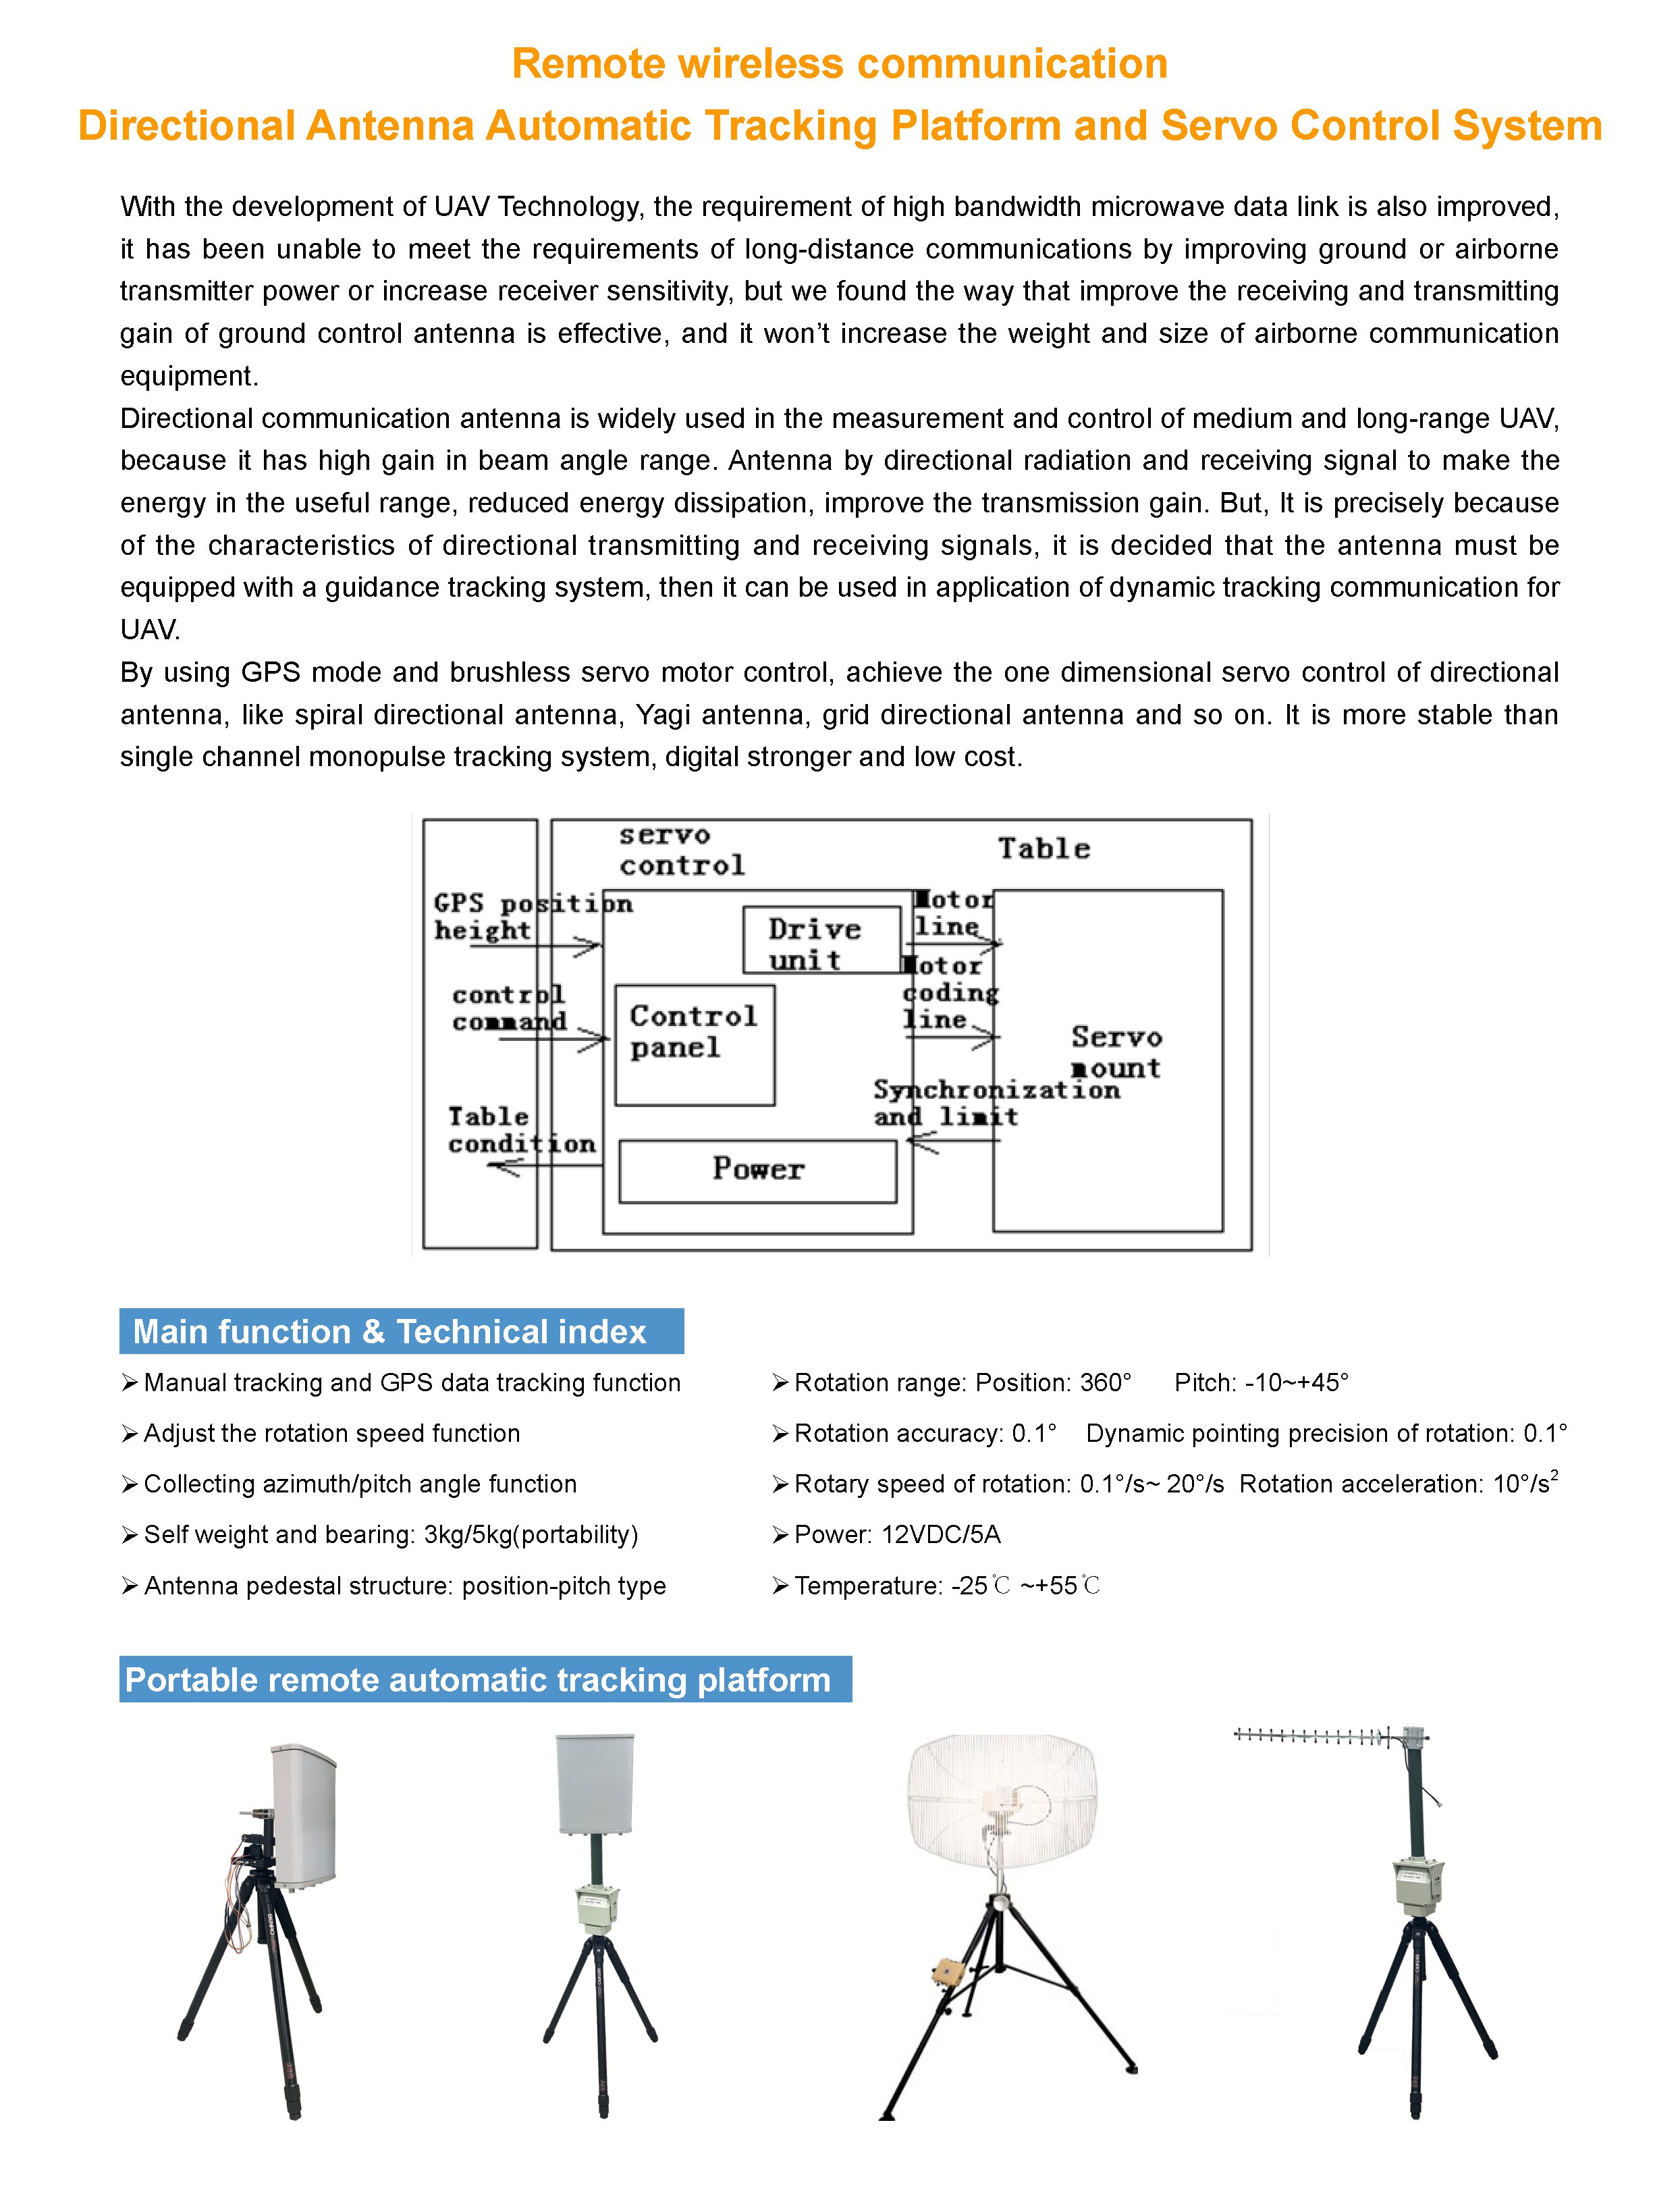 Automatically Tracking System for Directional Antenna(图1)